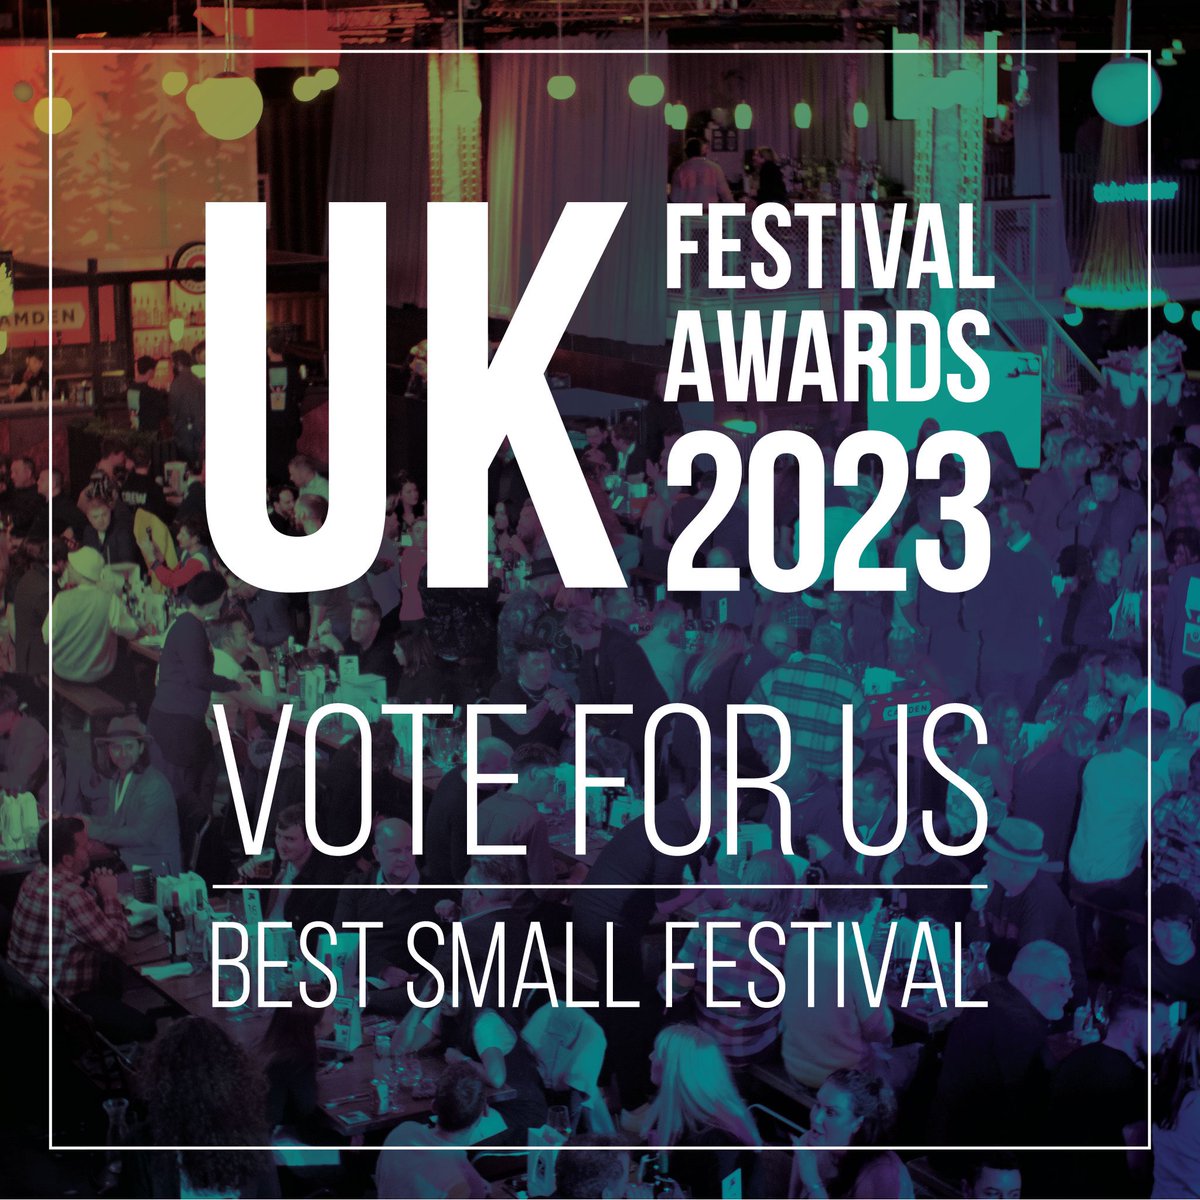 We’re over the moon to be shortlisted for Best Small Festival in the UK Festival Awards 👊 To win, we need the help of our FBTS fans! Please vote for us before Oct 23rd at the link below/in bio: surveymonkey.co.uk/r/57CZDT5 Let’s see some East Lothian love 😊